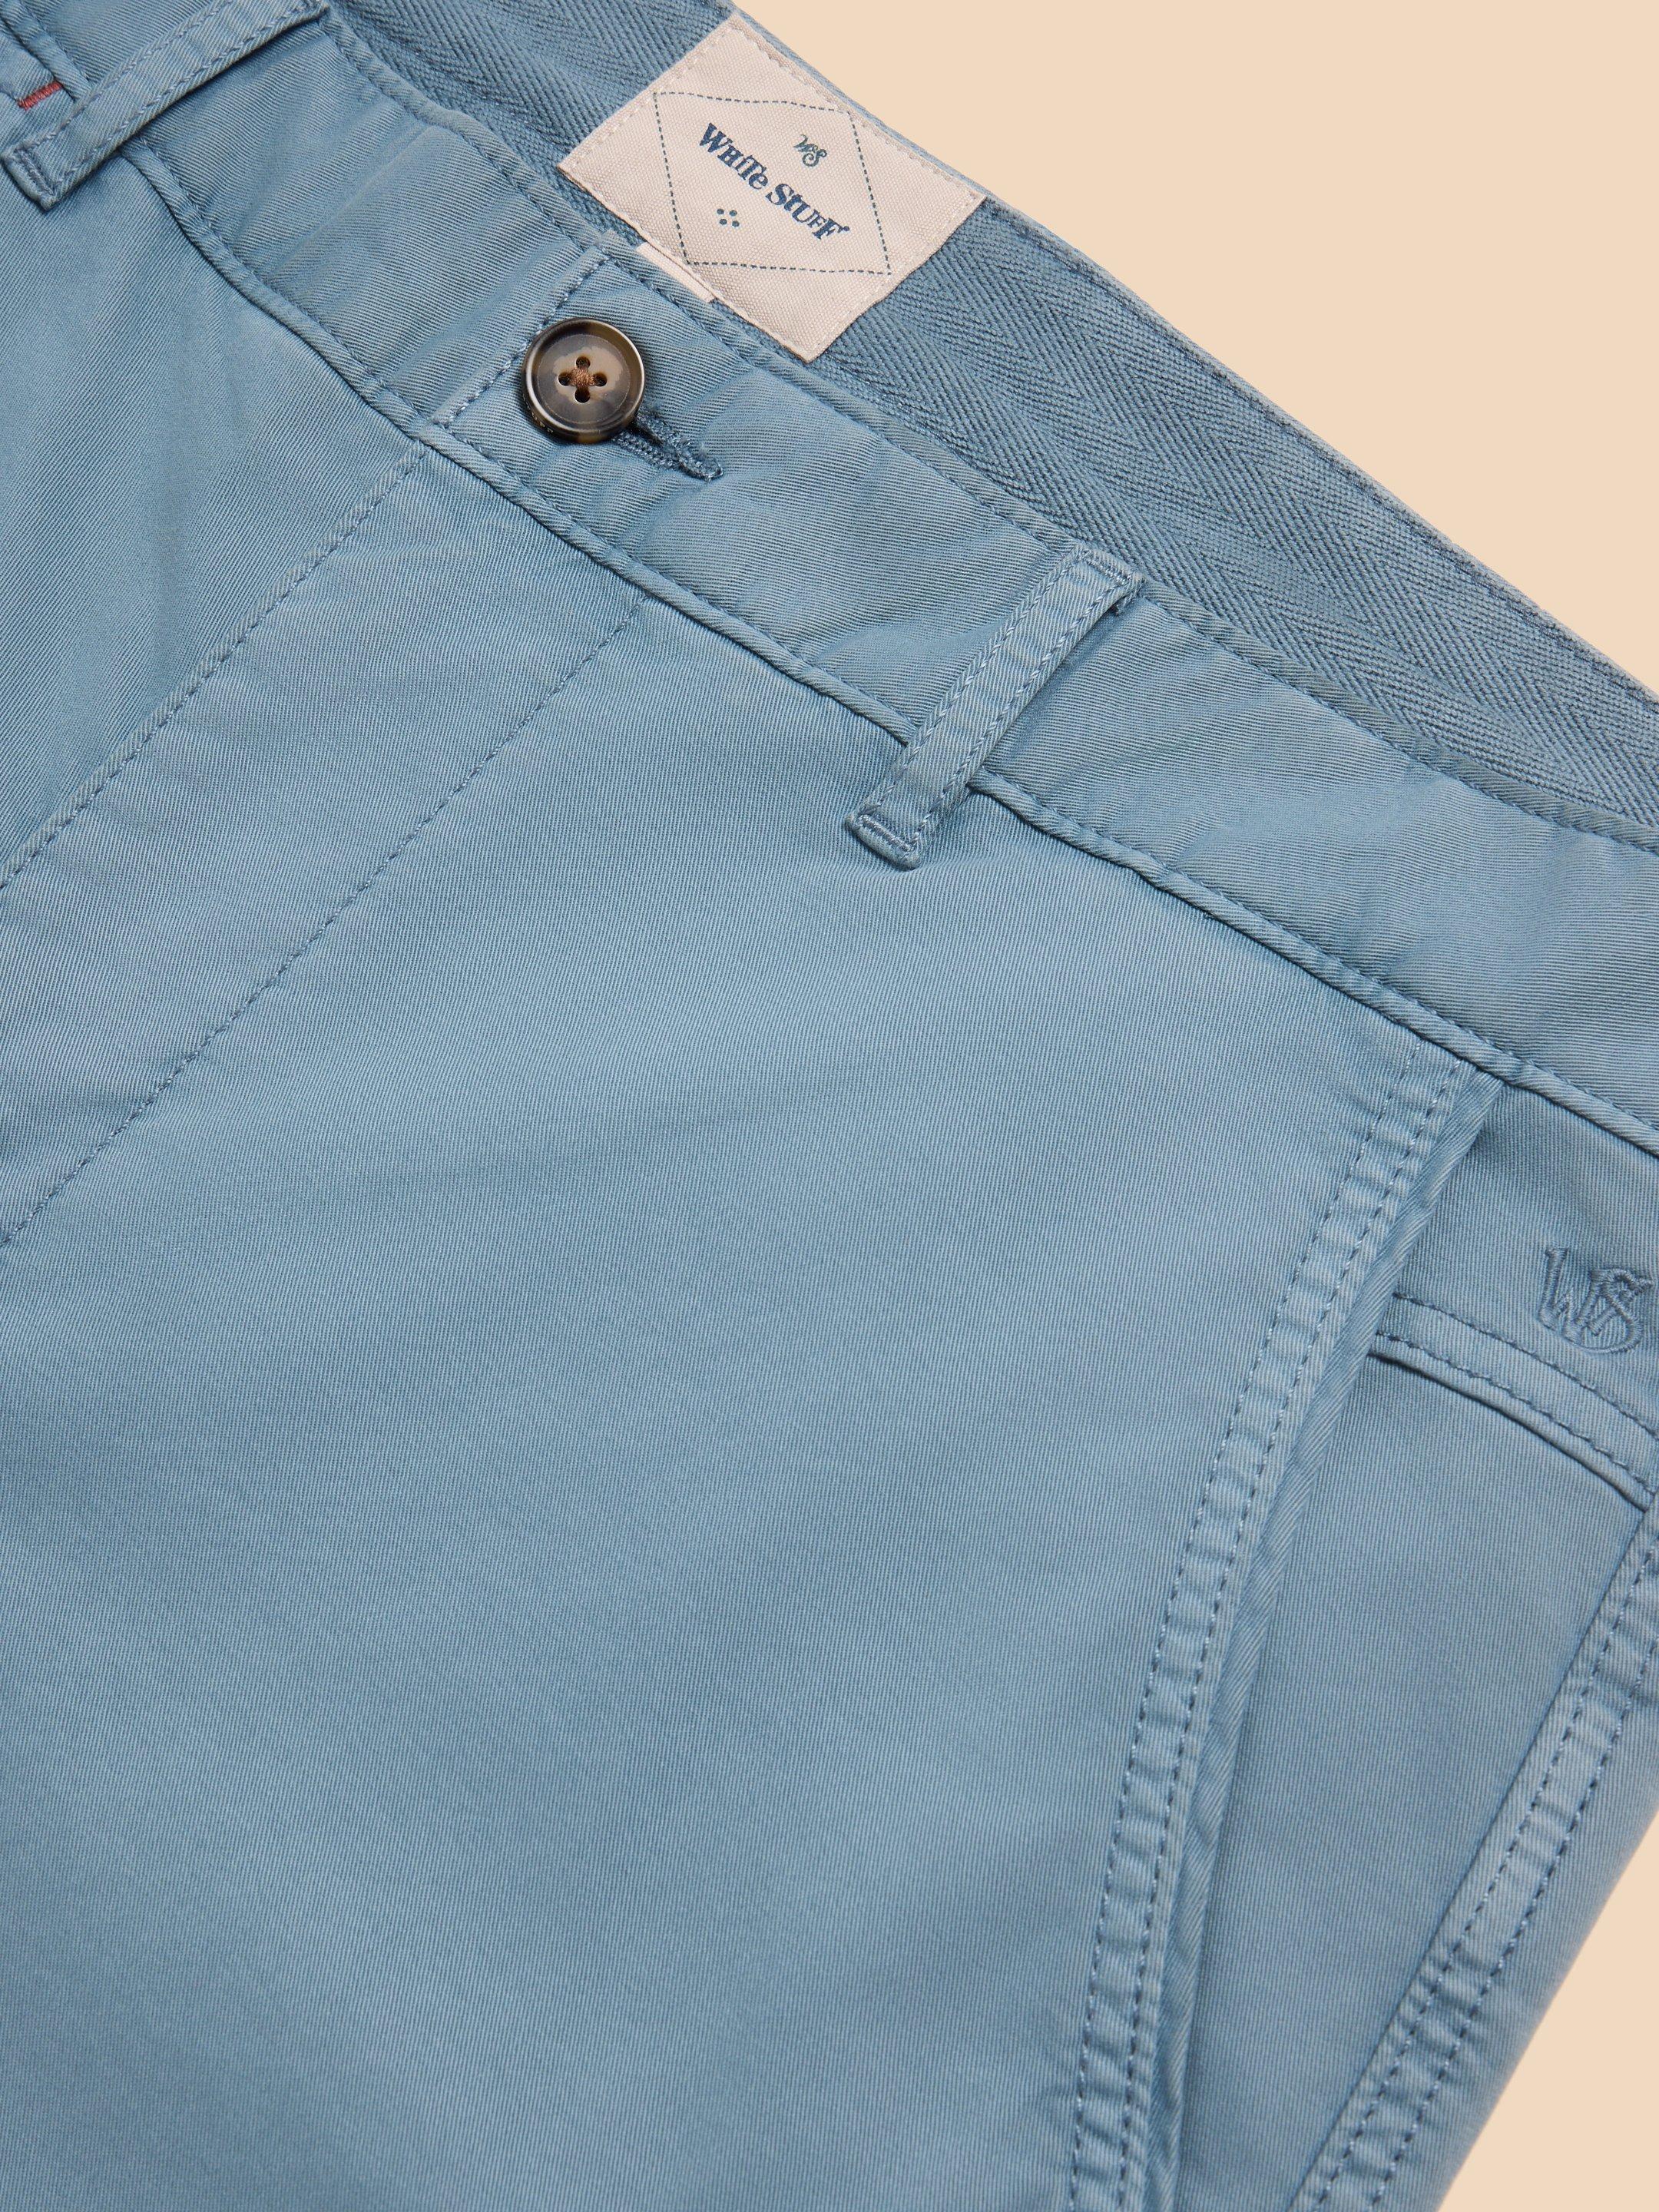 Sutton Organic Chino Trouser in MID BLUE - FLAT DETAIL